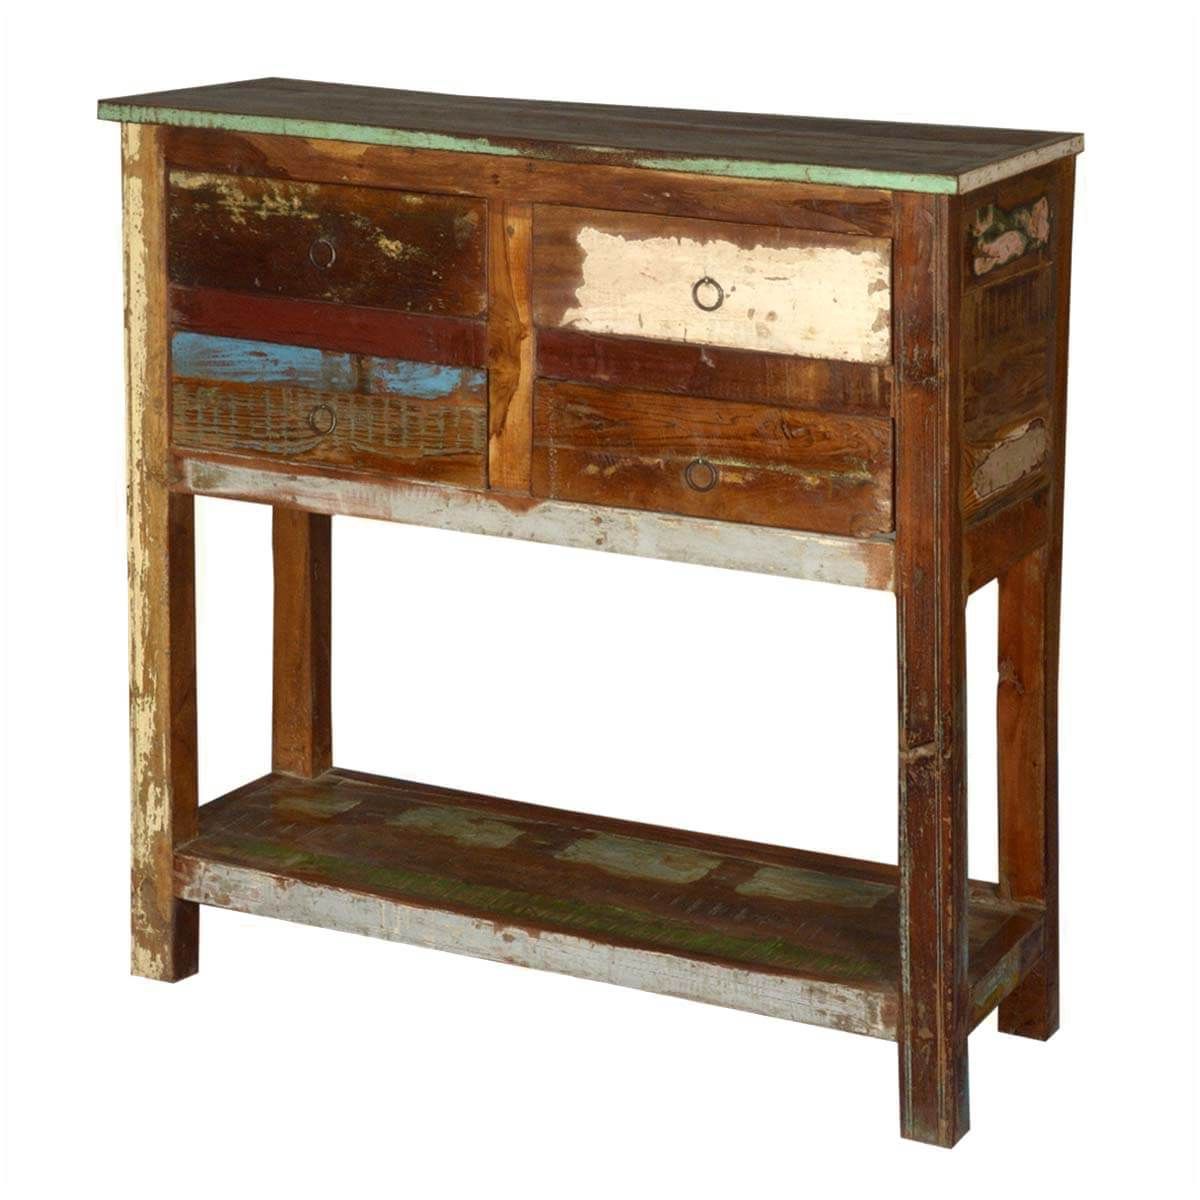 Reclaimed Wood Console Tables For Recent 2 Tier Reclaimed Wood Console Table With 4 Drawers (View 7 of 10)